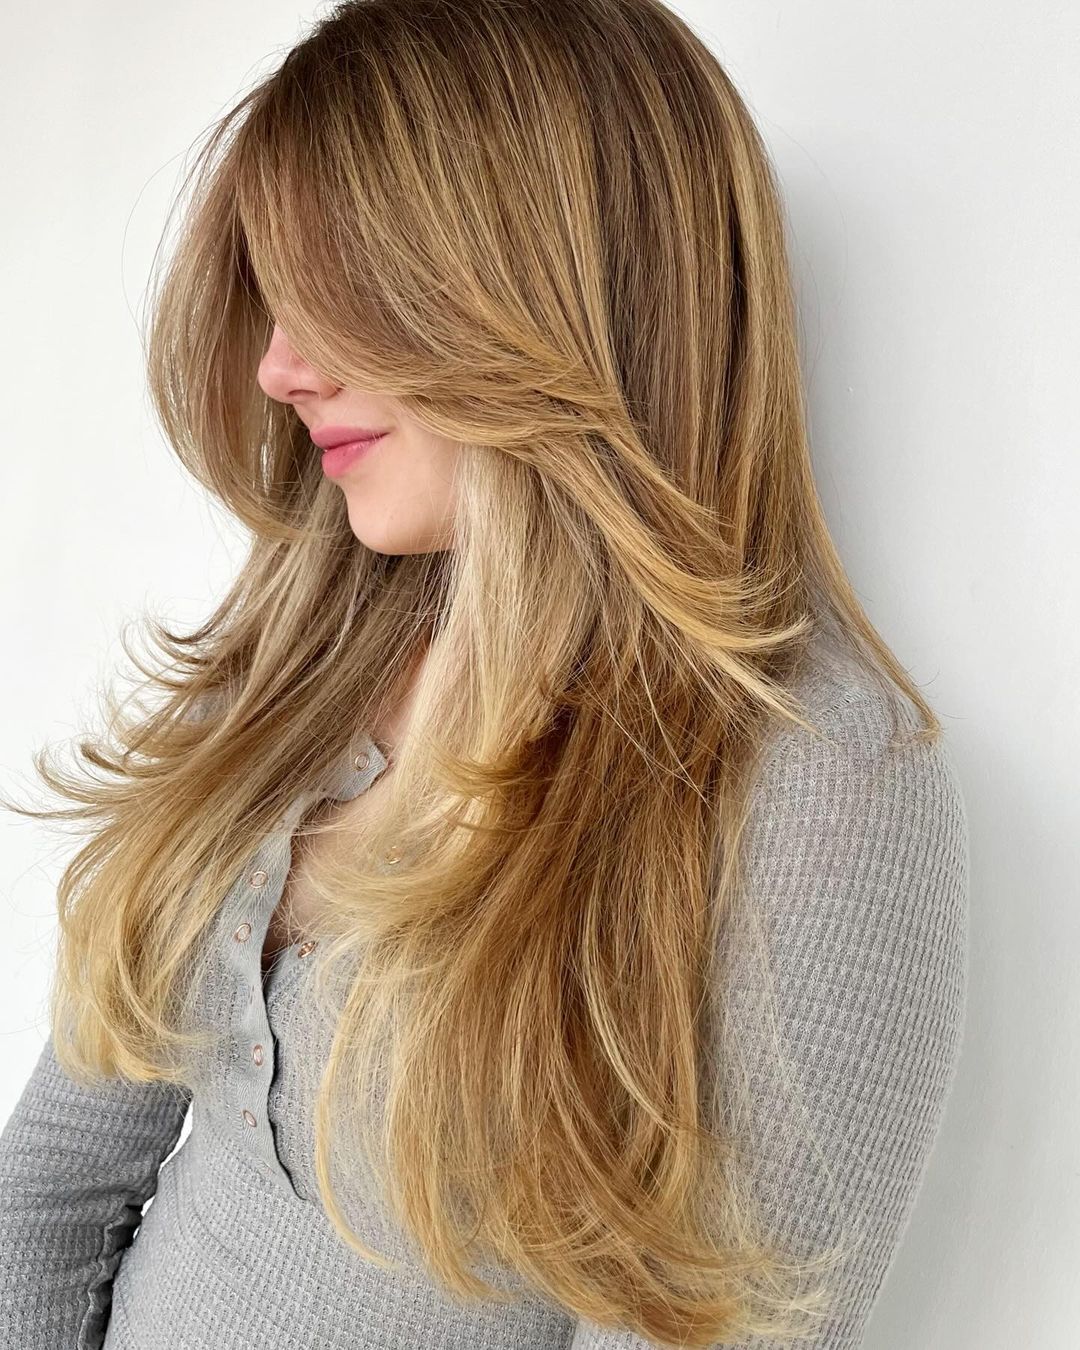 29 Stylish Long Fall Haircuts for 2024: Fresh Ideas for a Chic Look